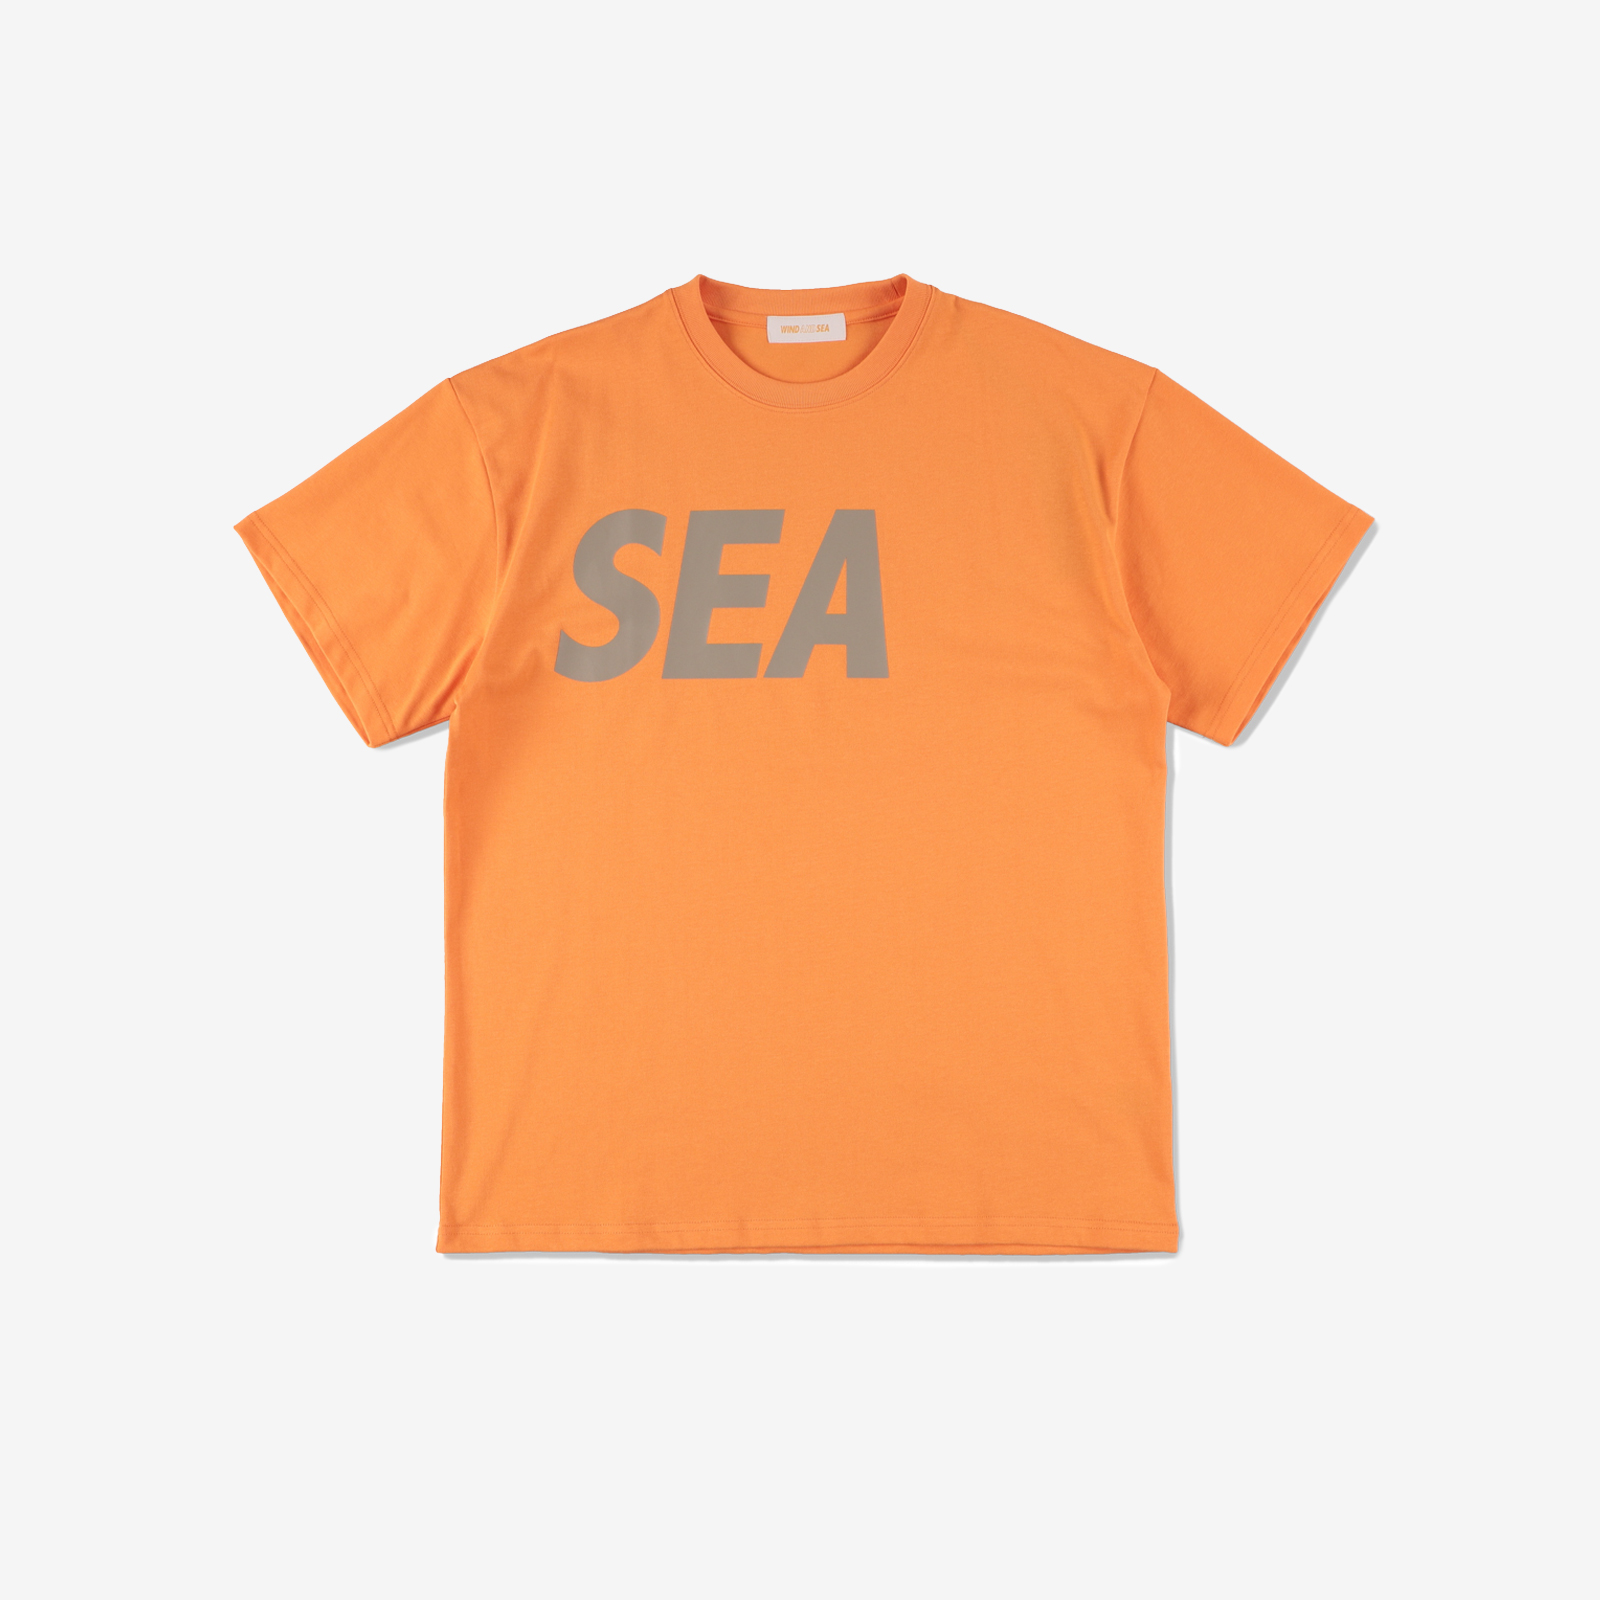 WIND AND SEA Tシャツ size S | myglobaltax.com